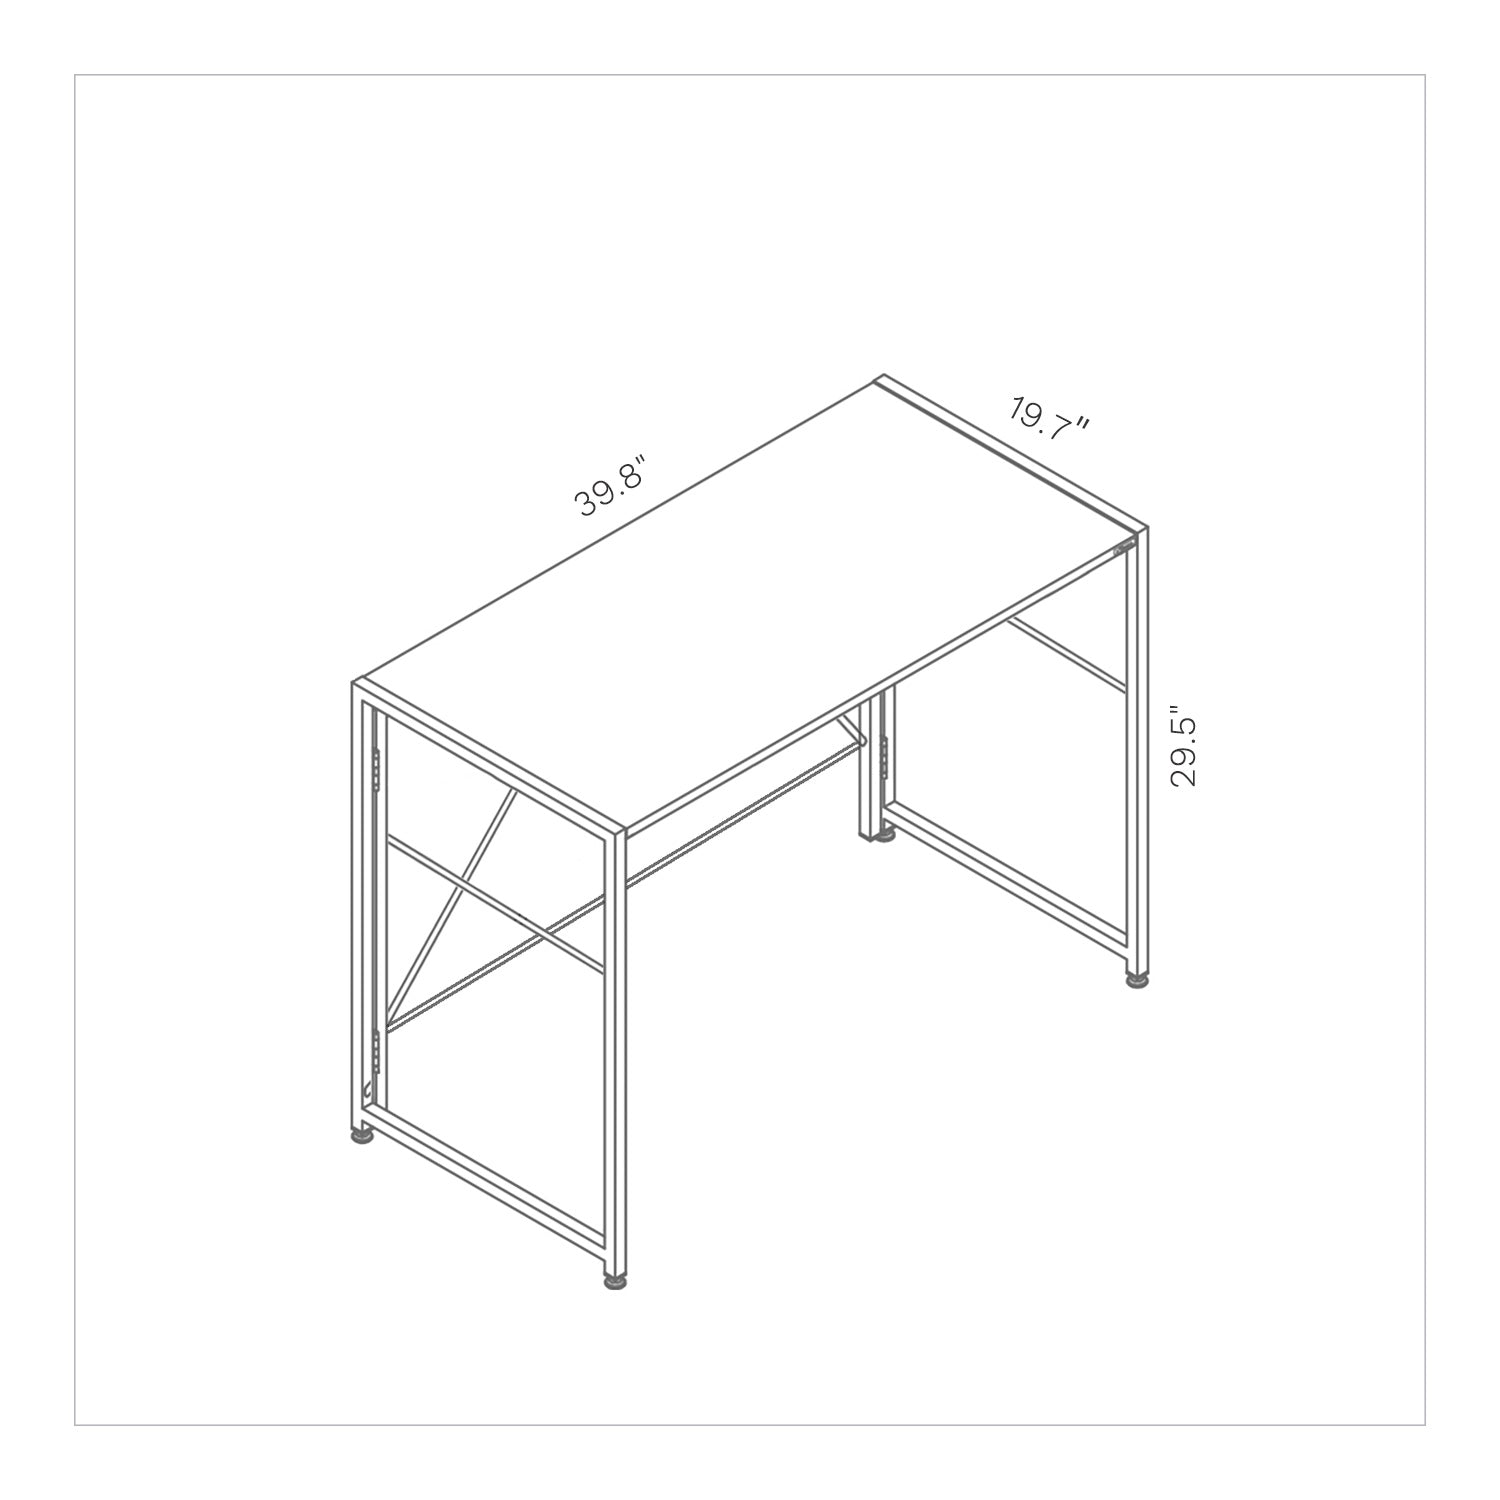 SOFSYS modern industrial folding desk for computer made with simple eco-friendly 39.8 inch oak table top and minimalist, foldable metal frame